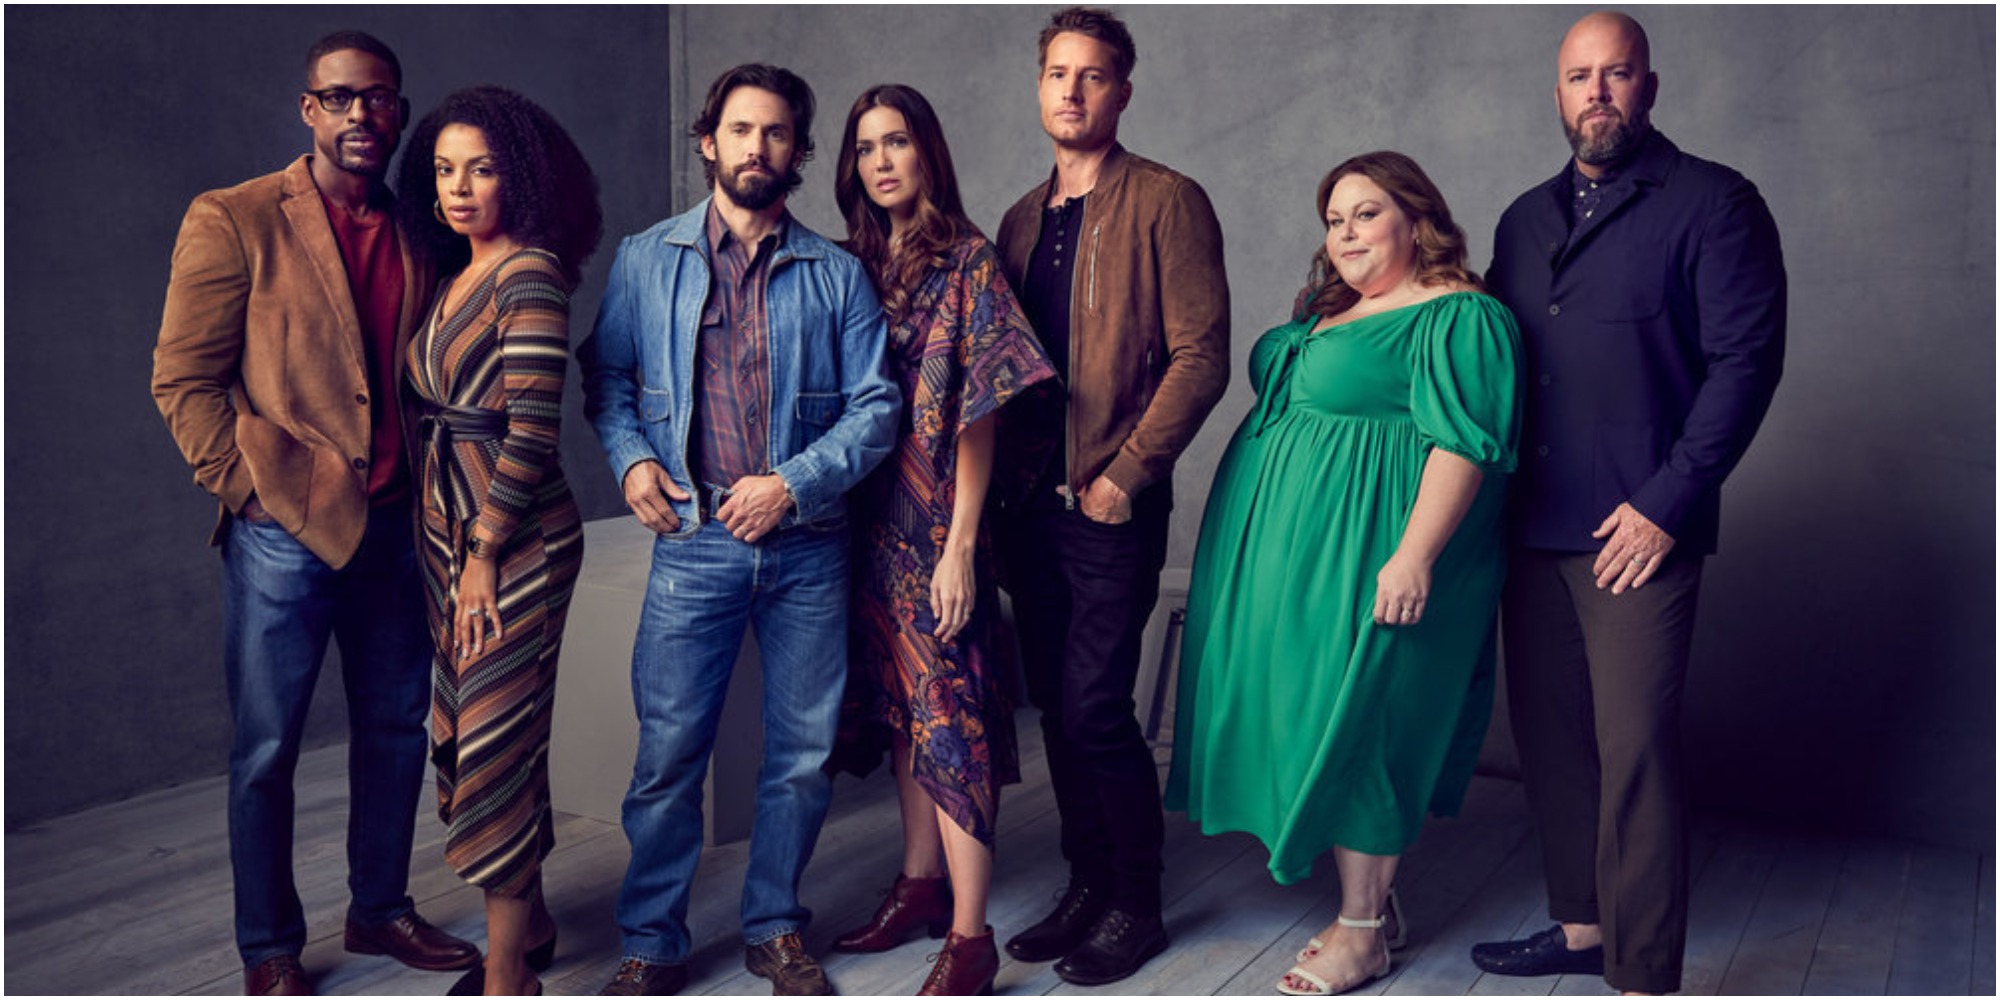 The cast of NBC's "This Is Us."